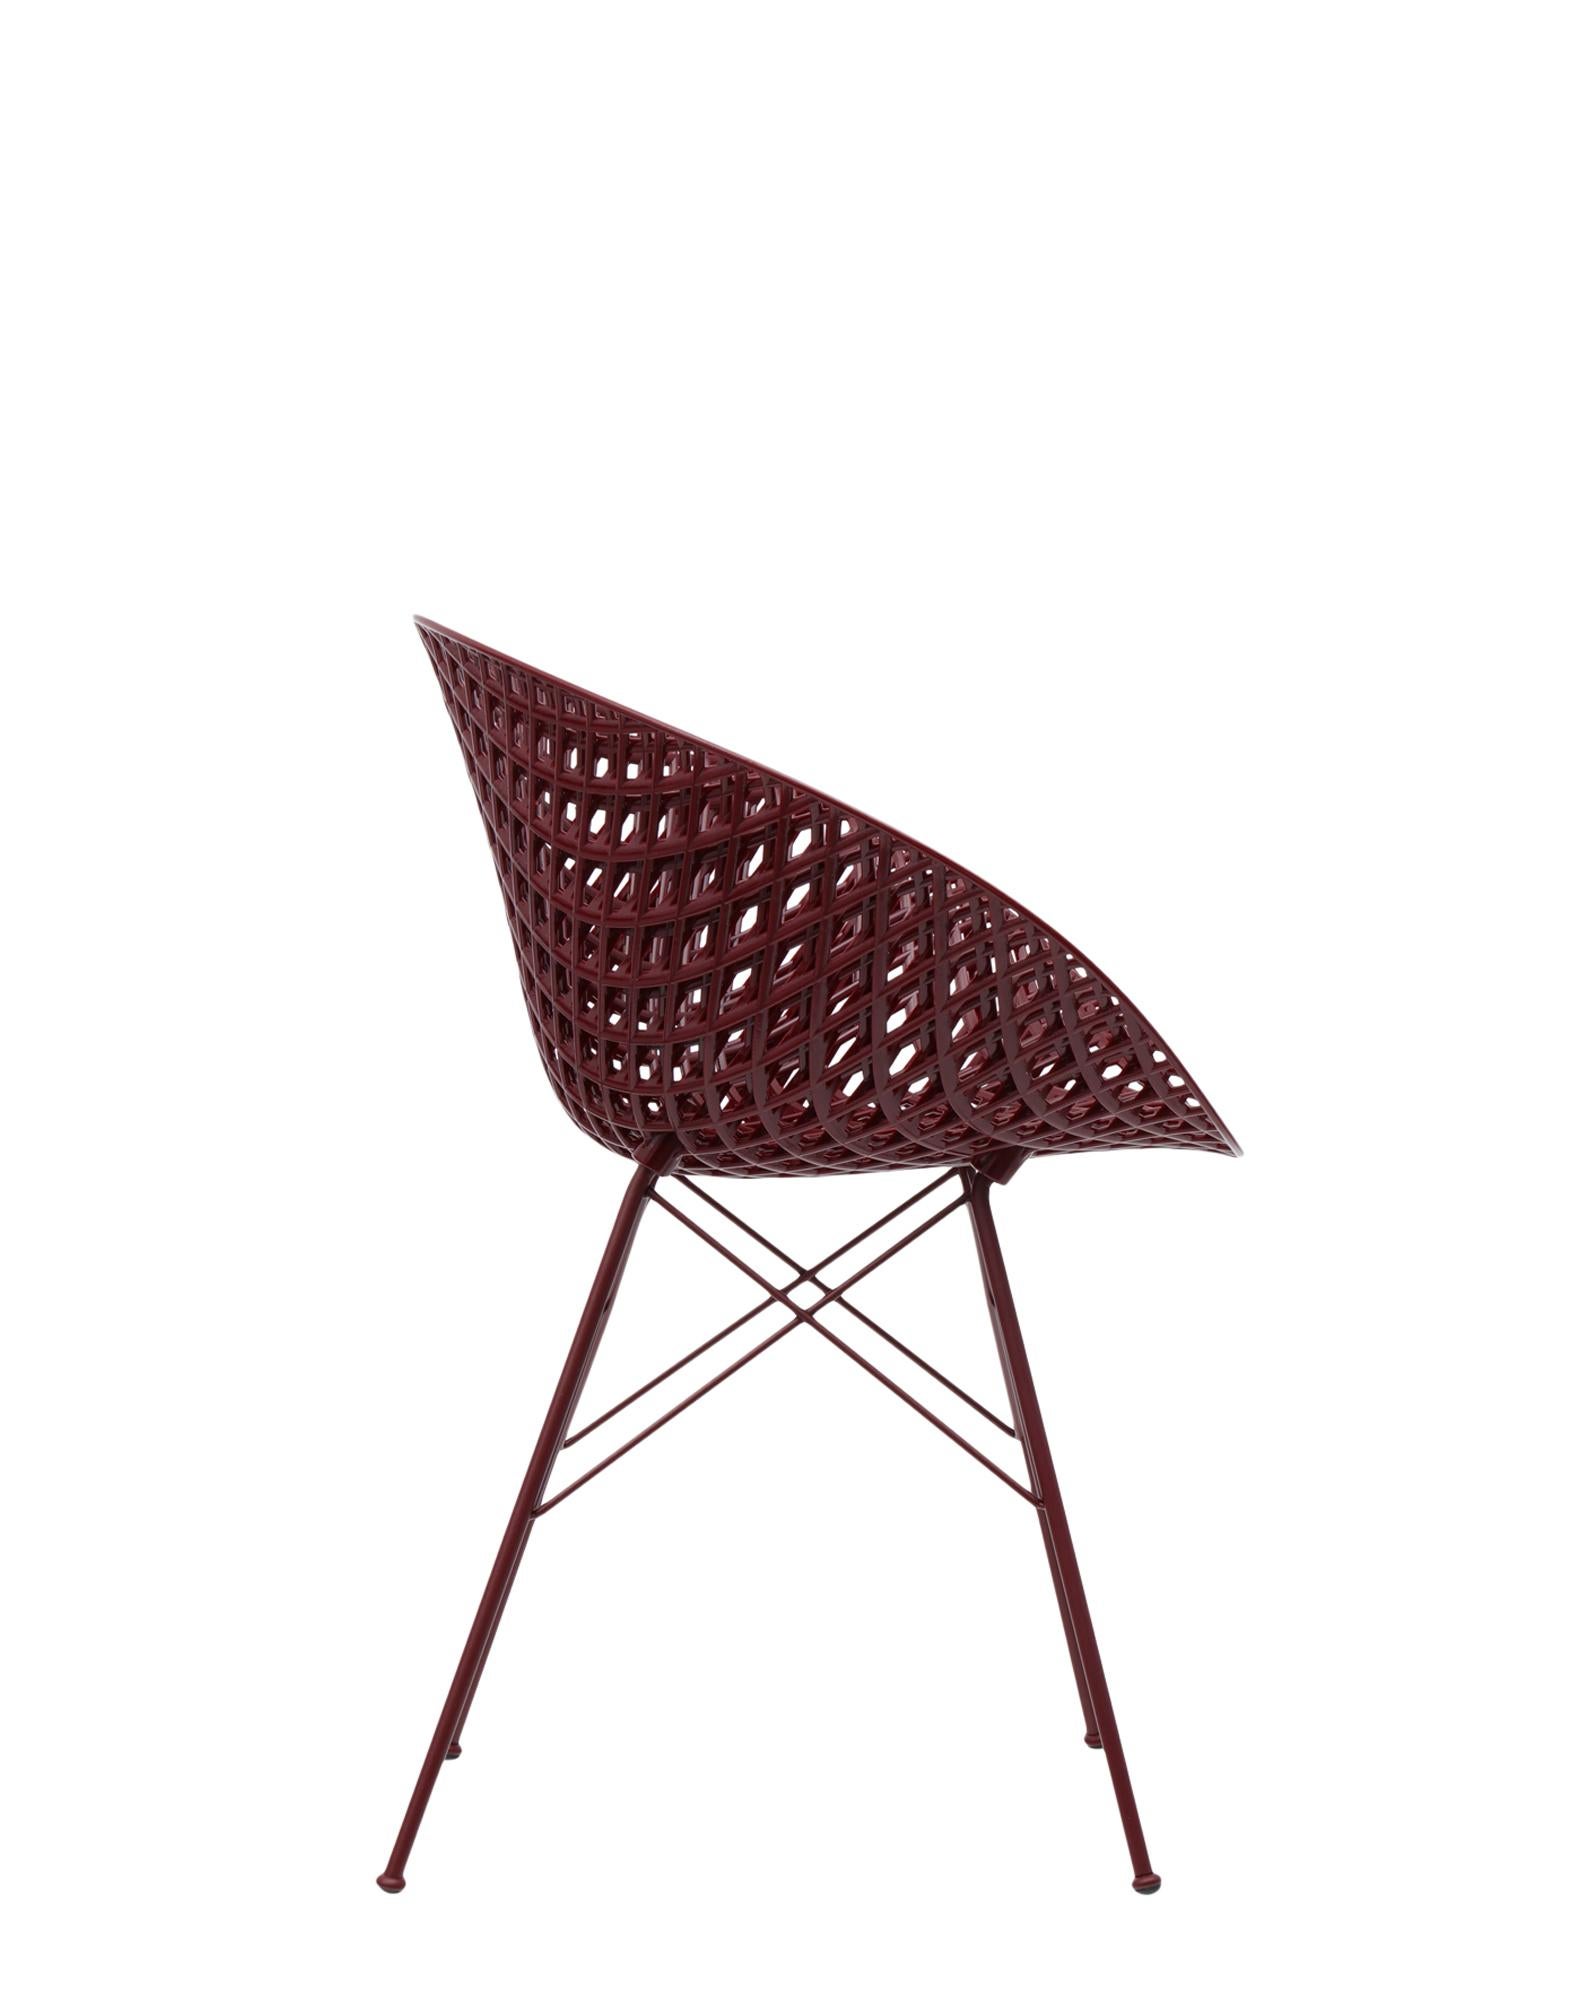 Modern Set of 2 Kartell Smatrik Chair in Plum with Plum Legs by Tokujin Yoshioka For Sale